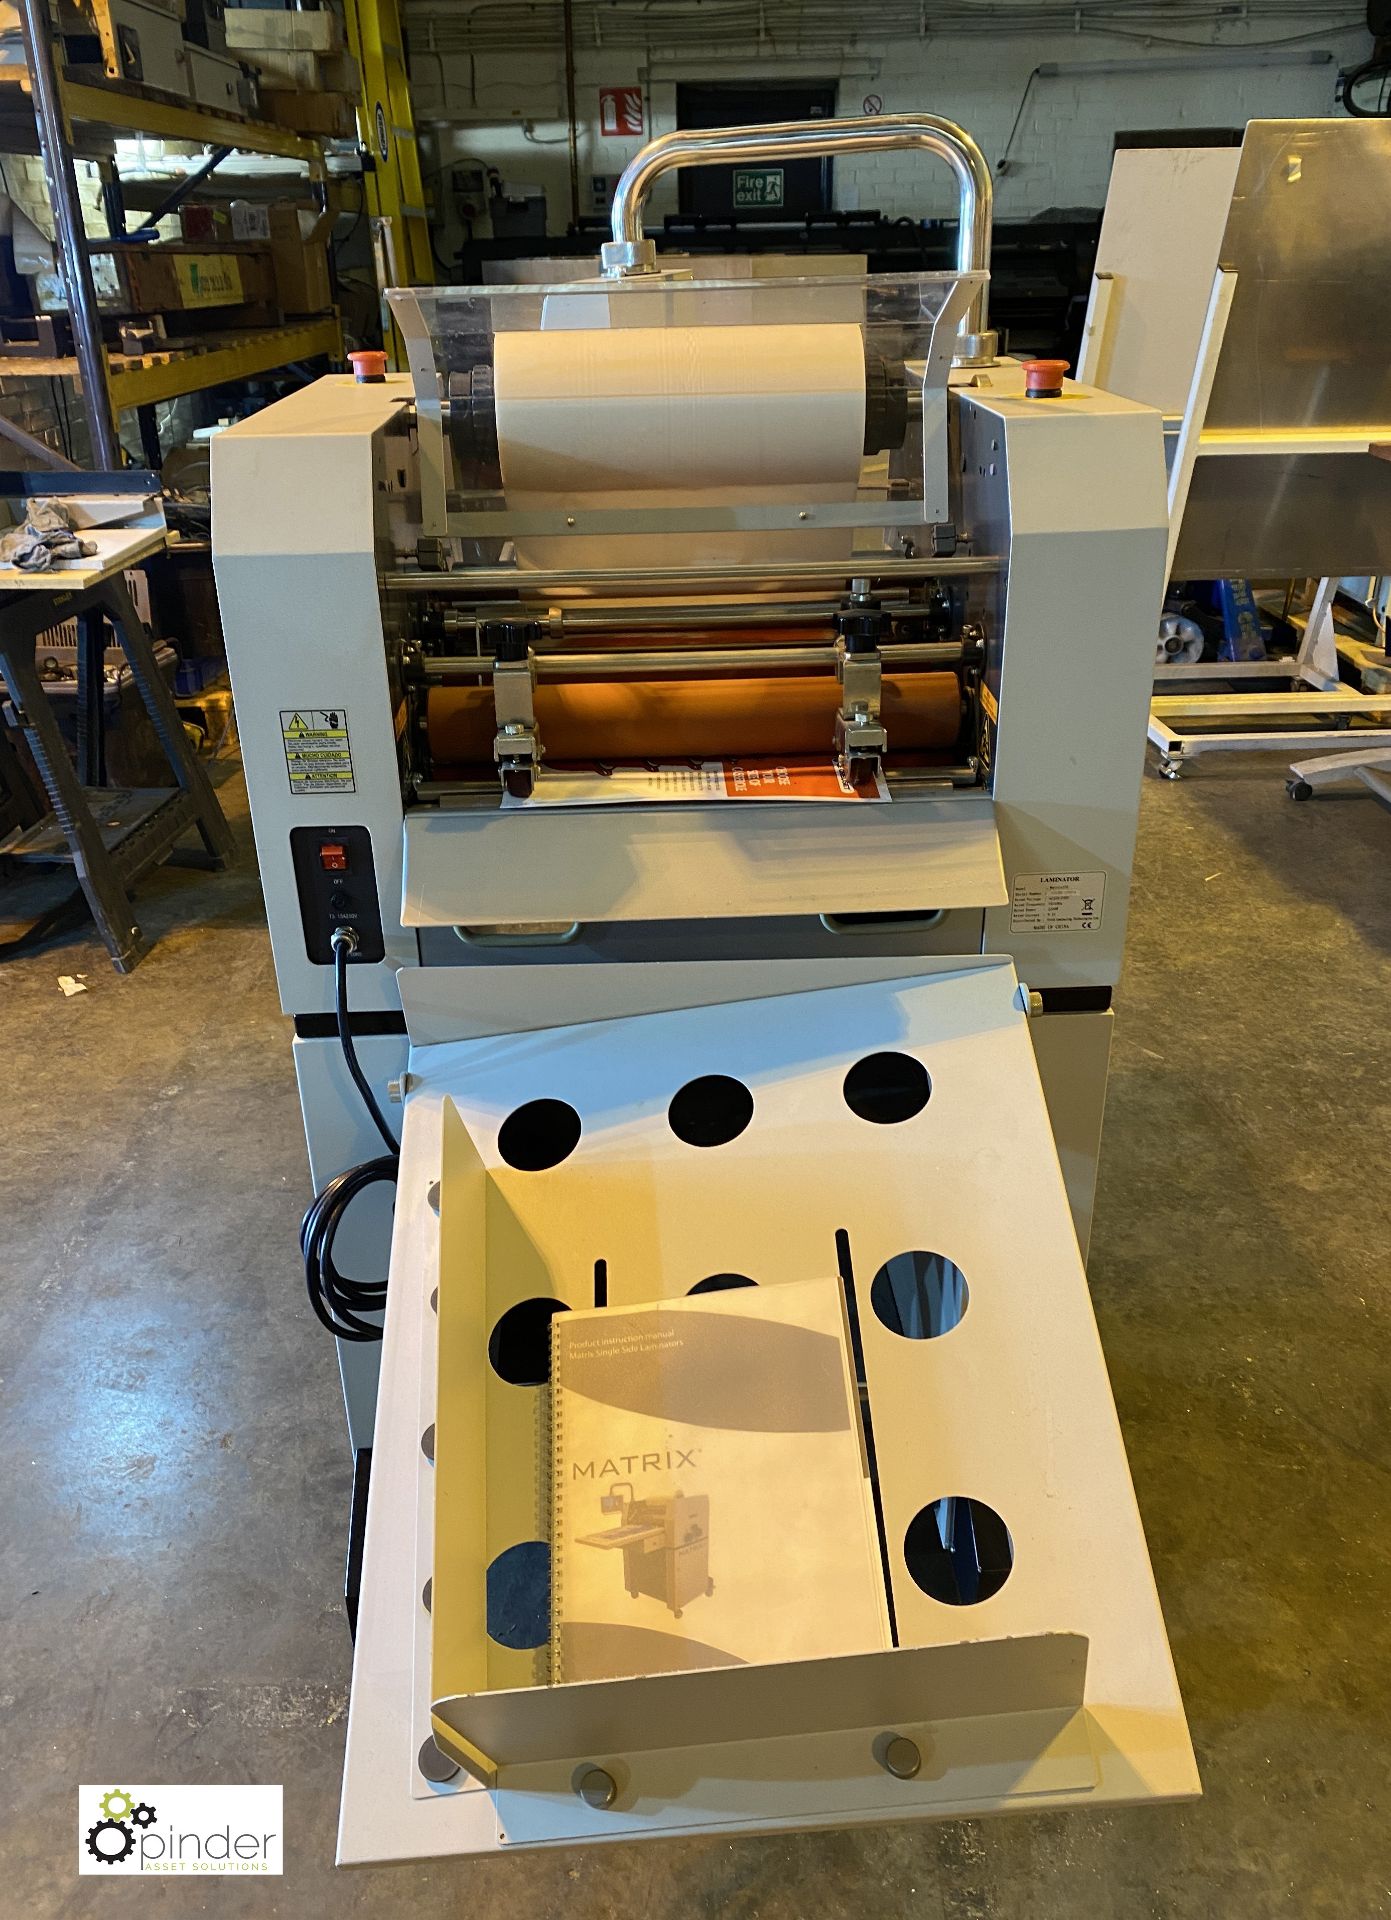 Matrix 370 Roll Laminator, 315mm width, 240volts, serial number 1112MX-370074, with 5 part rolls - Image 5 of 12